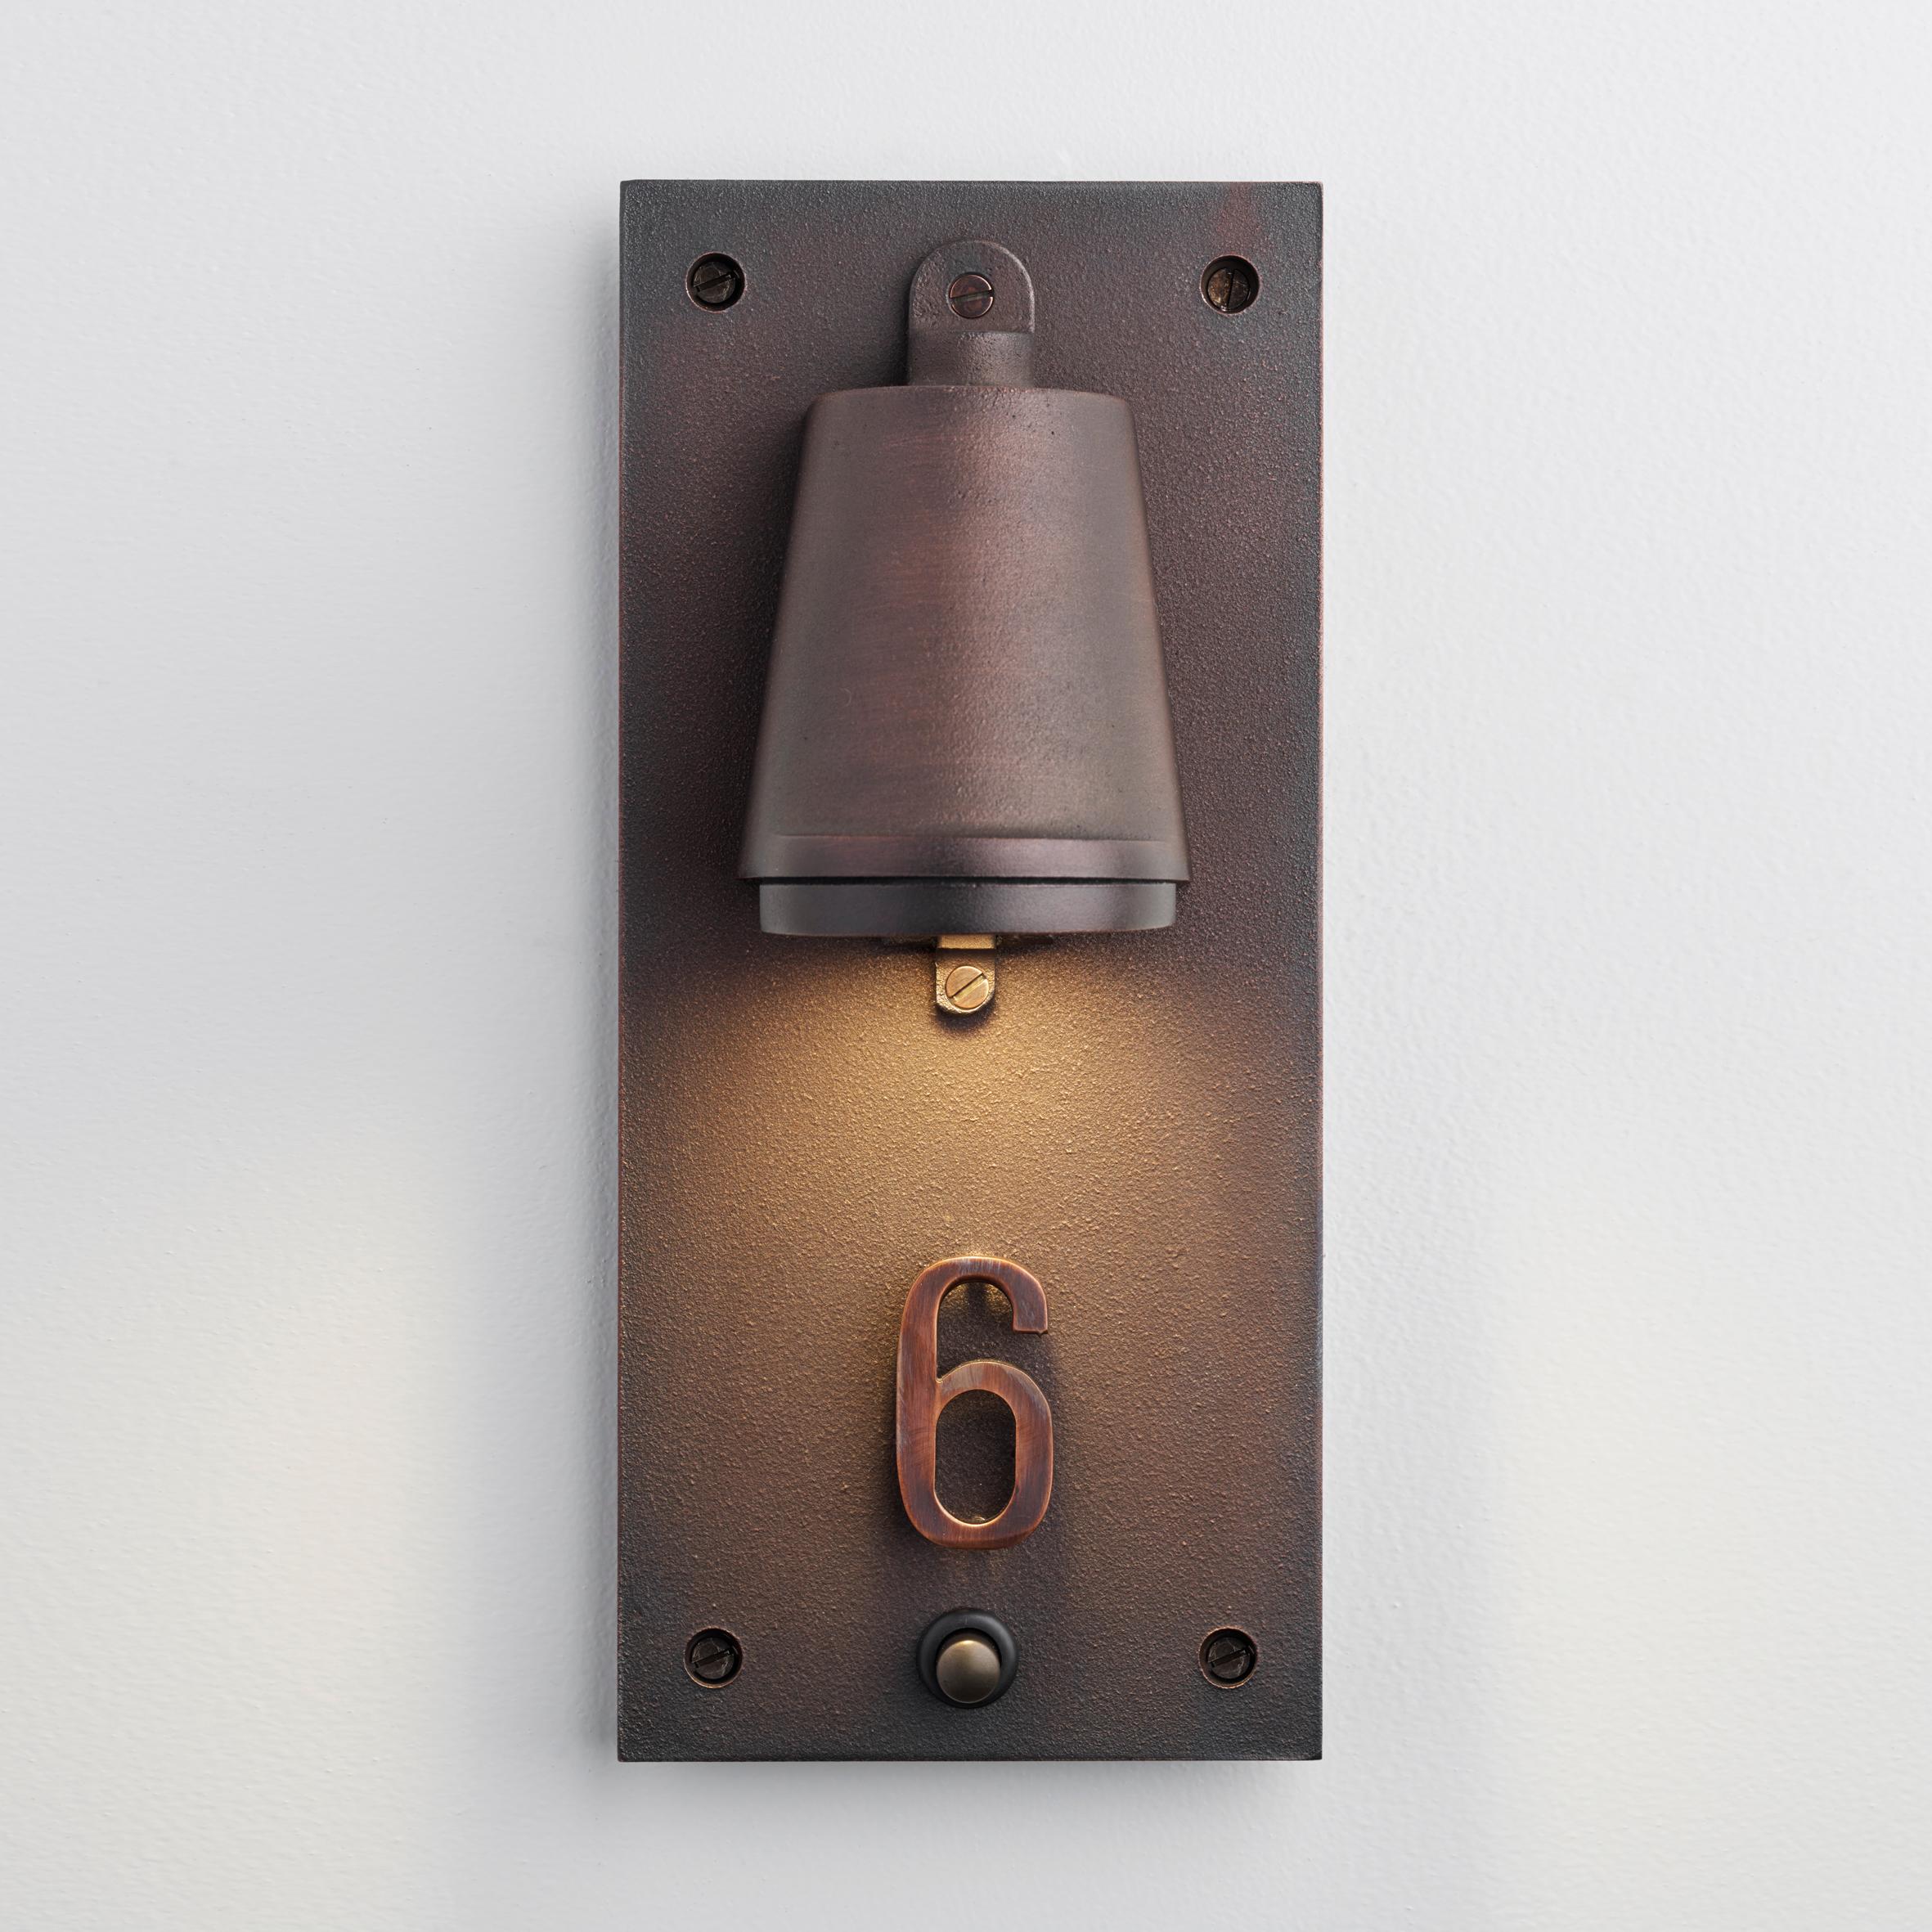 Wall light in sand casted brass with frosted glass. Wall plate with max. Three numbers included, in rough dark bronze or rough aluminium. The housenumber must always be used with spreaderlight. For outdoor use (IP43).

LED module 230V 4,3W 2700K